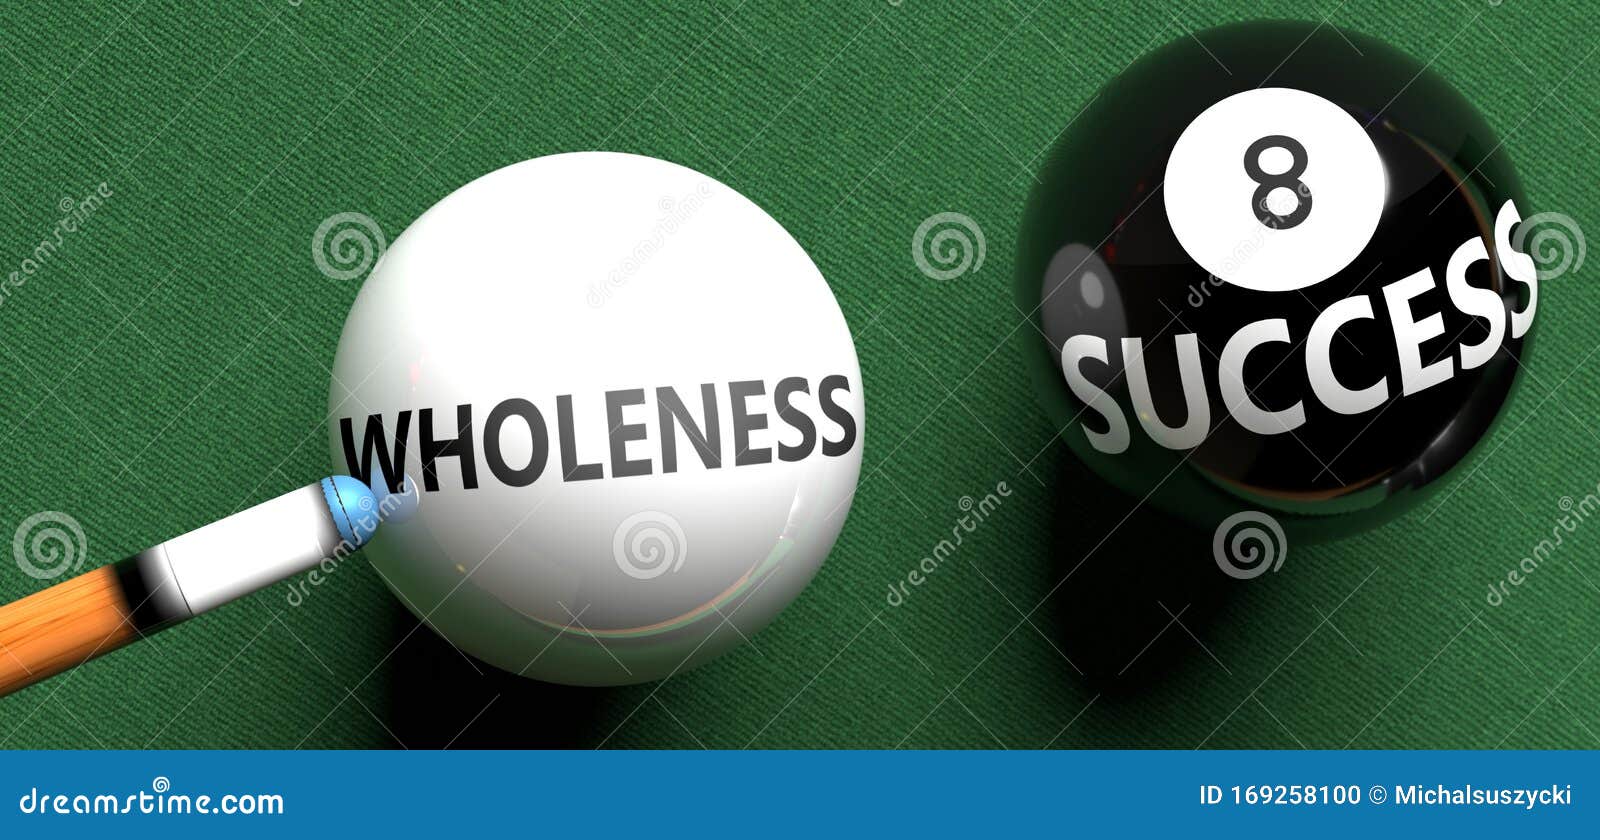 wholeness brings success - pictured as word wholeness on a pool ball, to ize that wholeness can initiate success, 3d